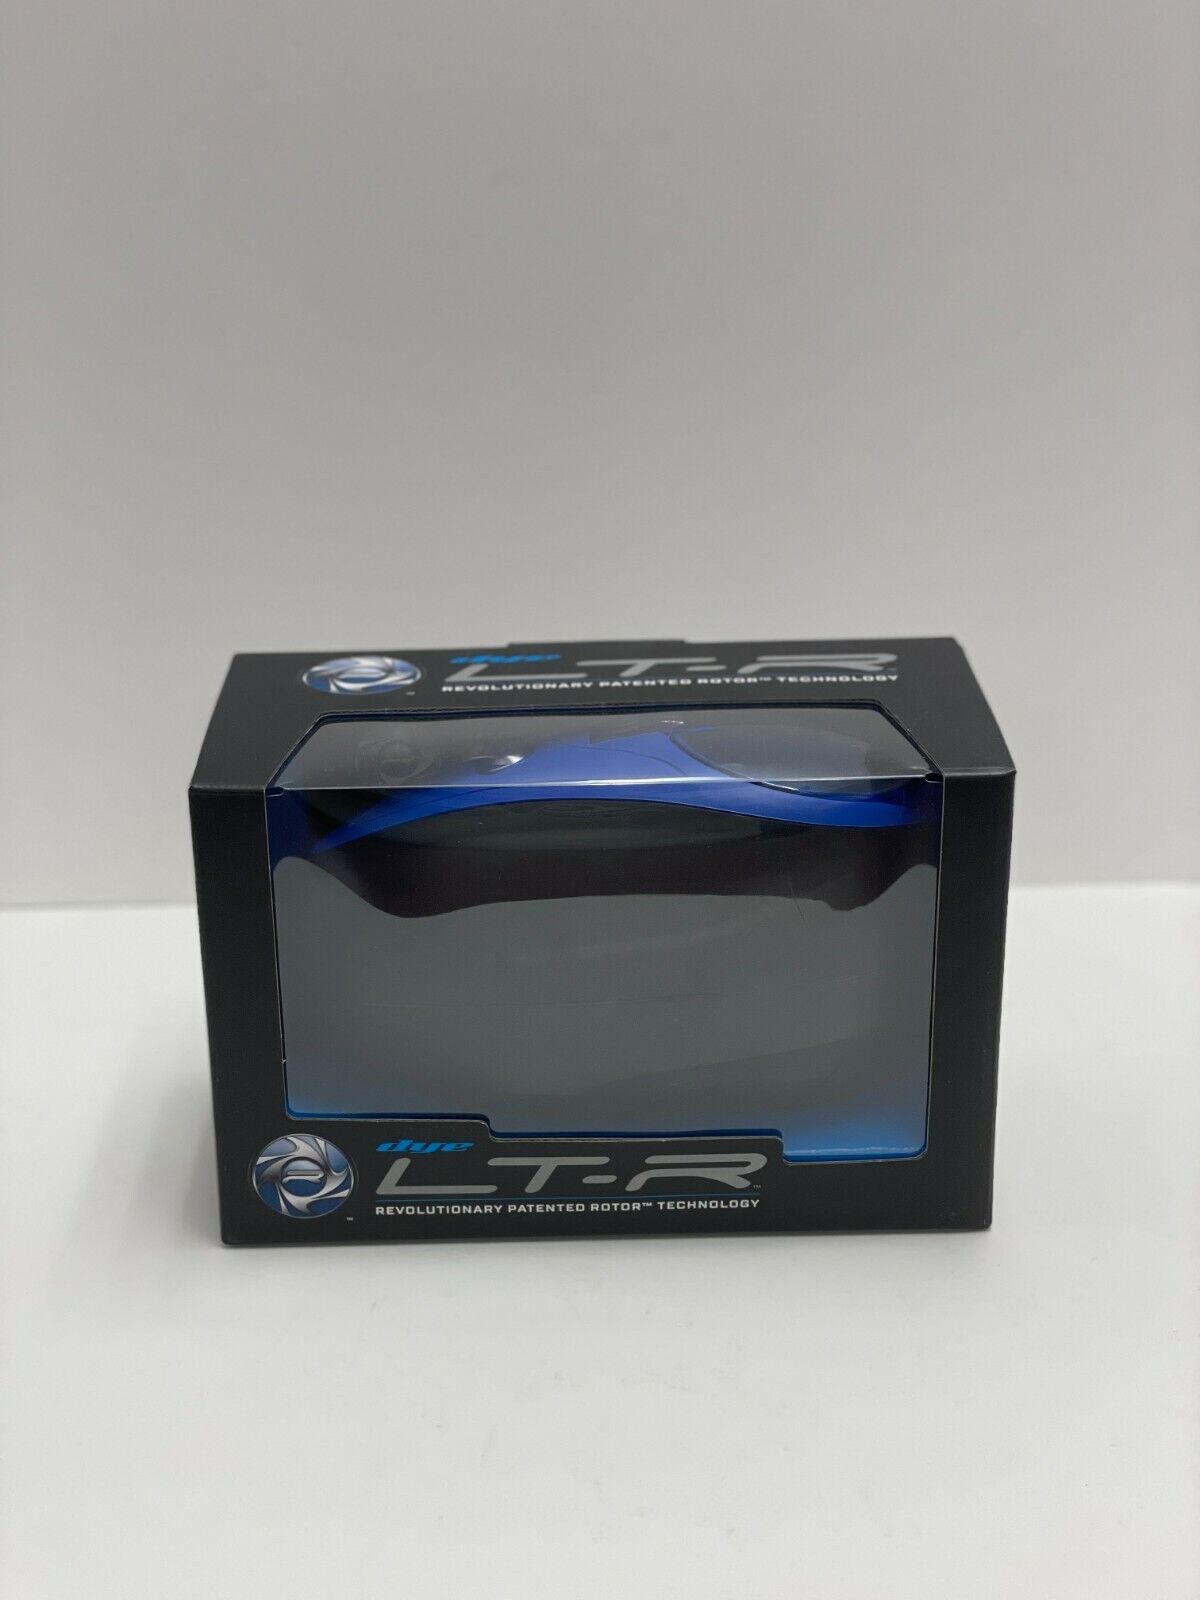 Dye 2021 spring and summer new Rotor LT-R Paintball Blue - Ranking integrated 1st place Hopper Loader